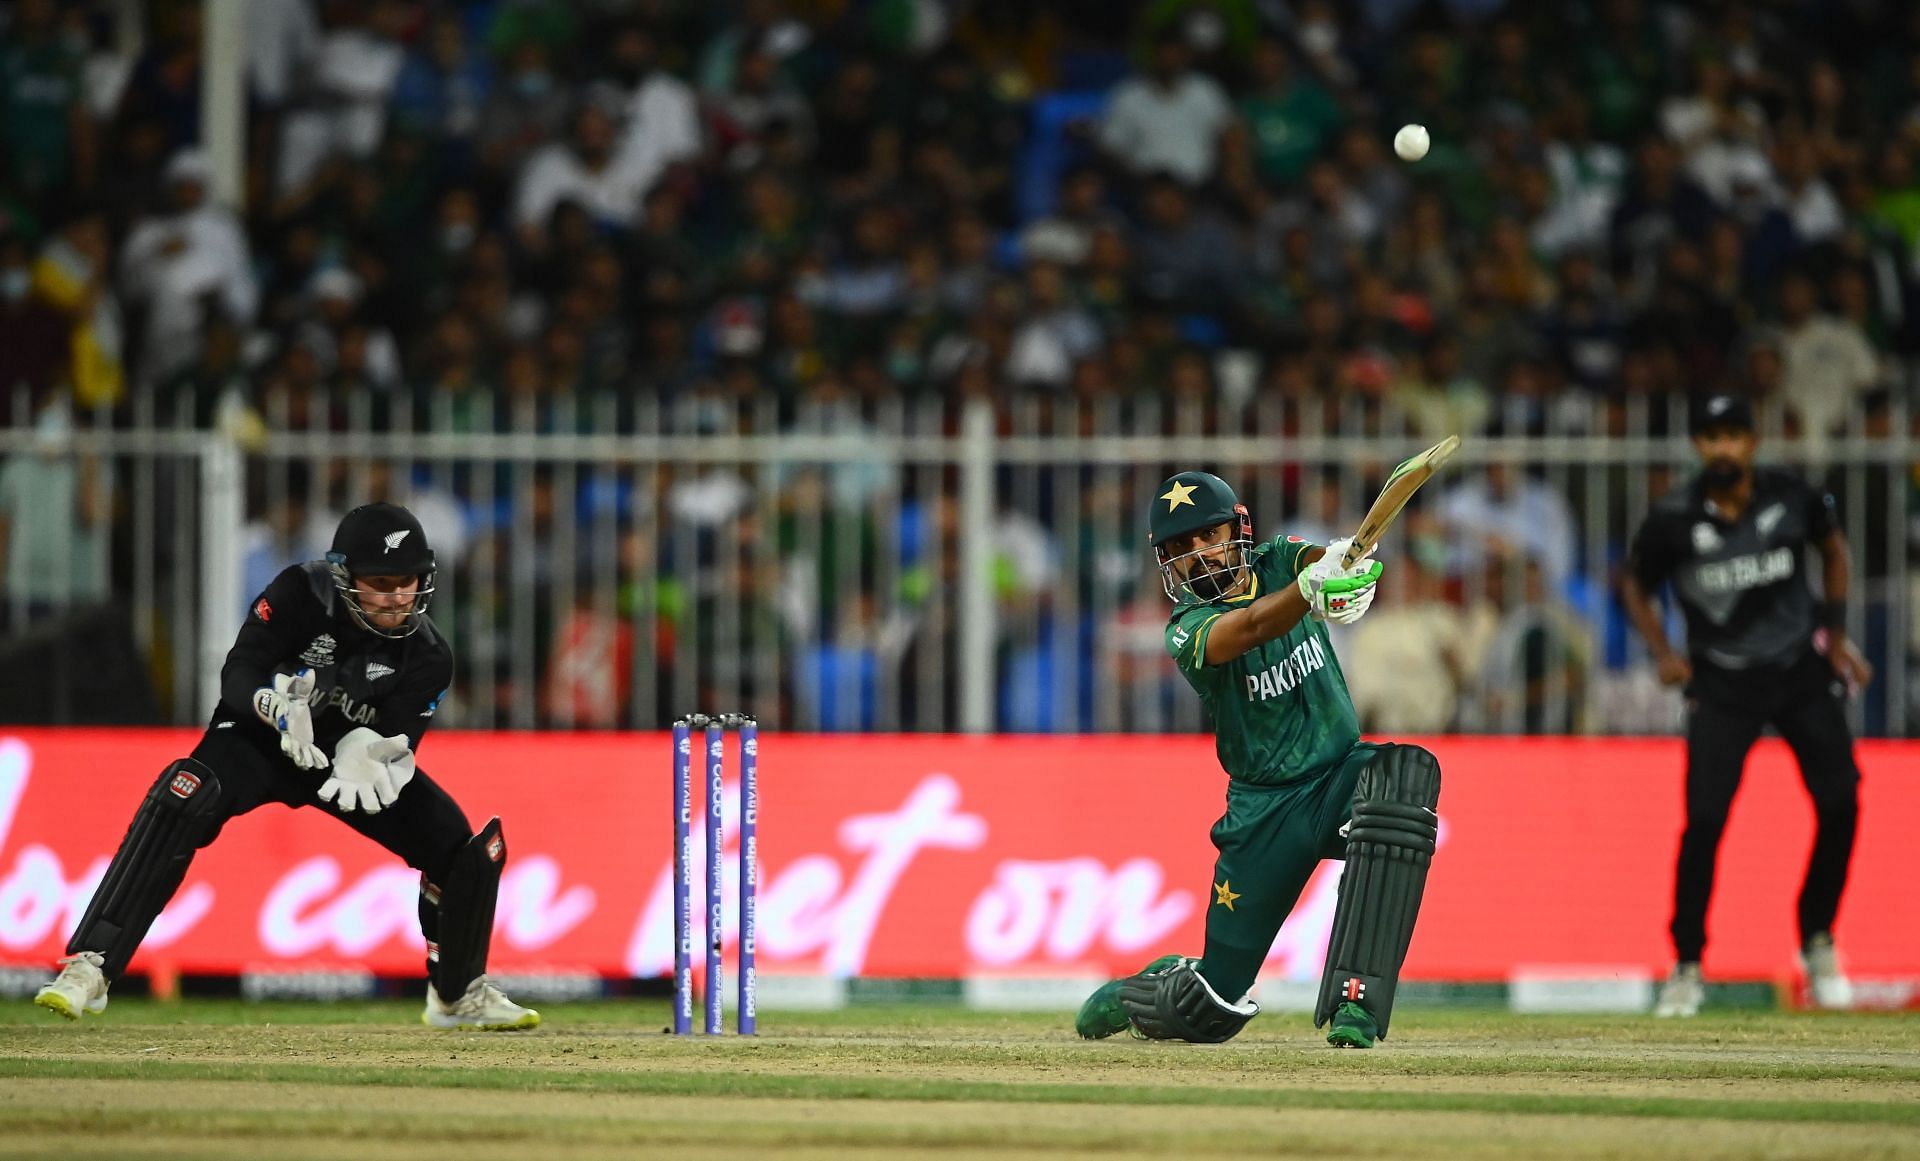 Pakistan kept their cool to get over the line against New Zealand